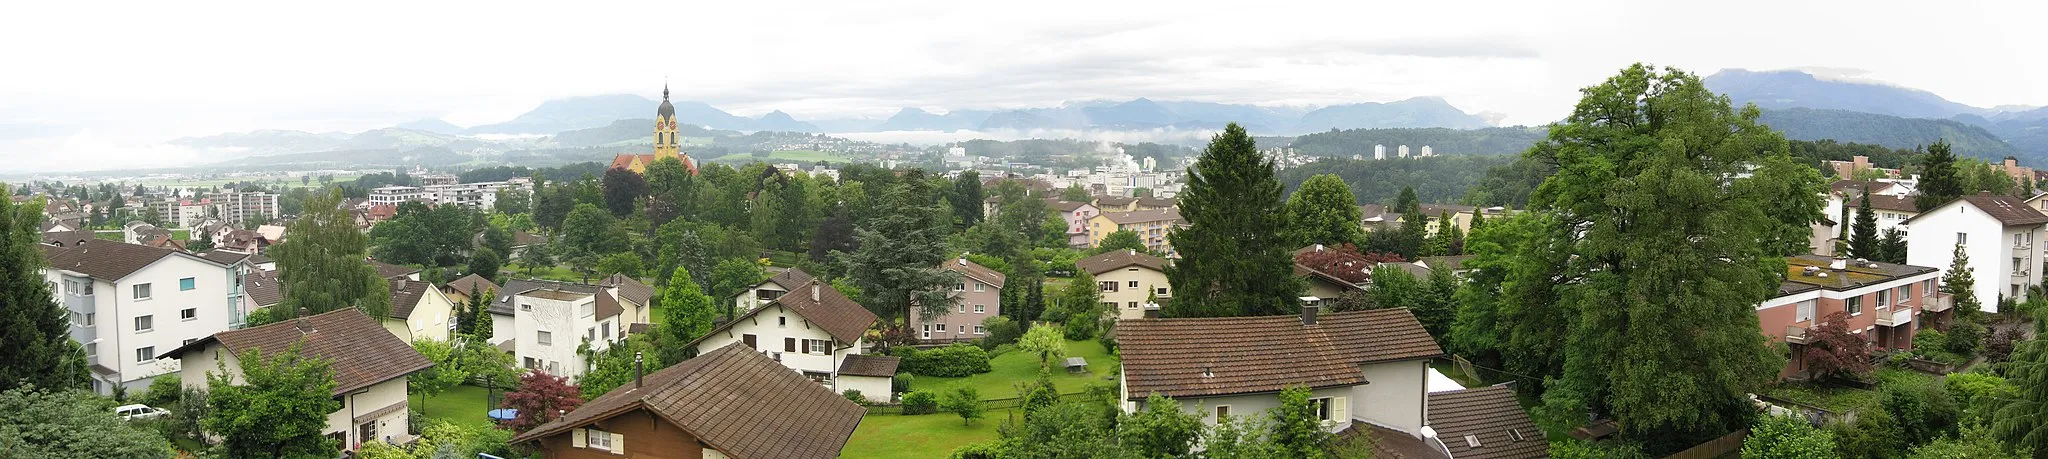 Photo showing: Panoramic view from a balcony in Emmenbruecke, Lucerne, Switzerland